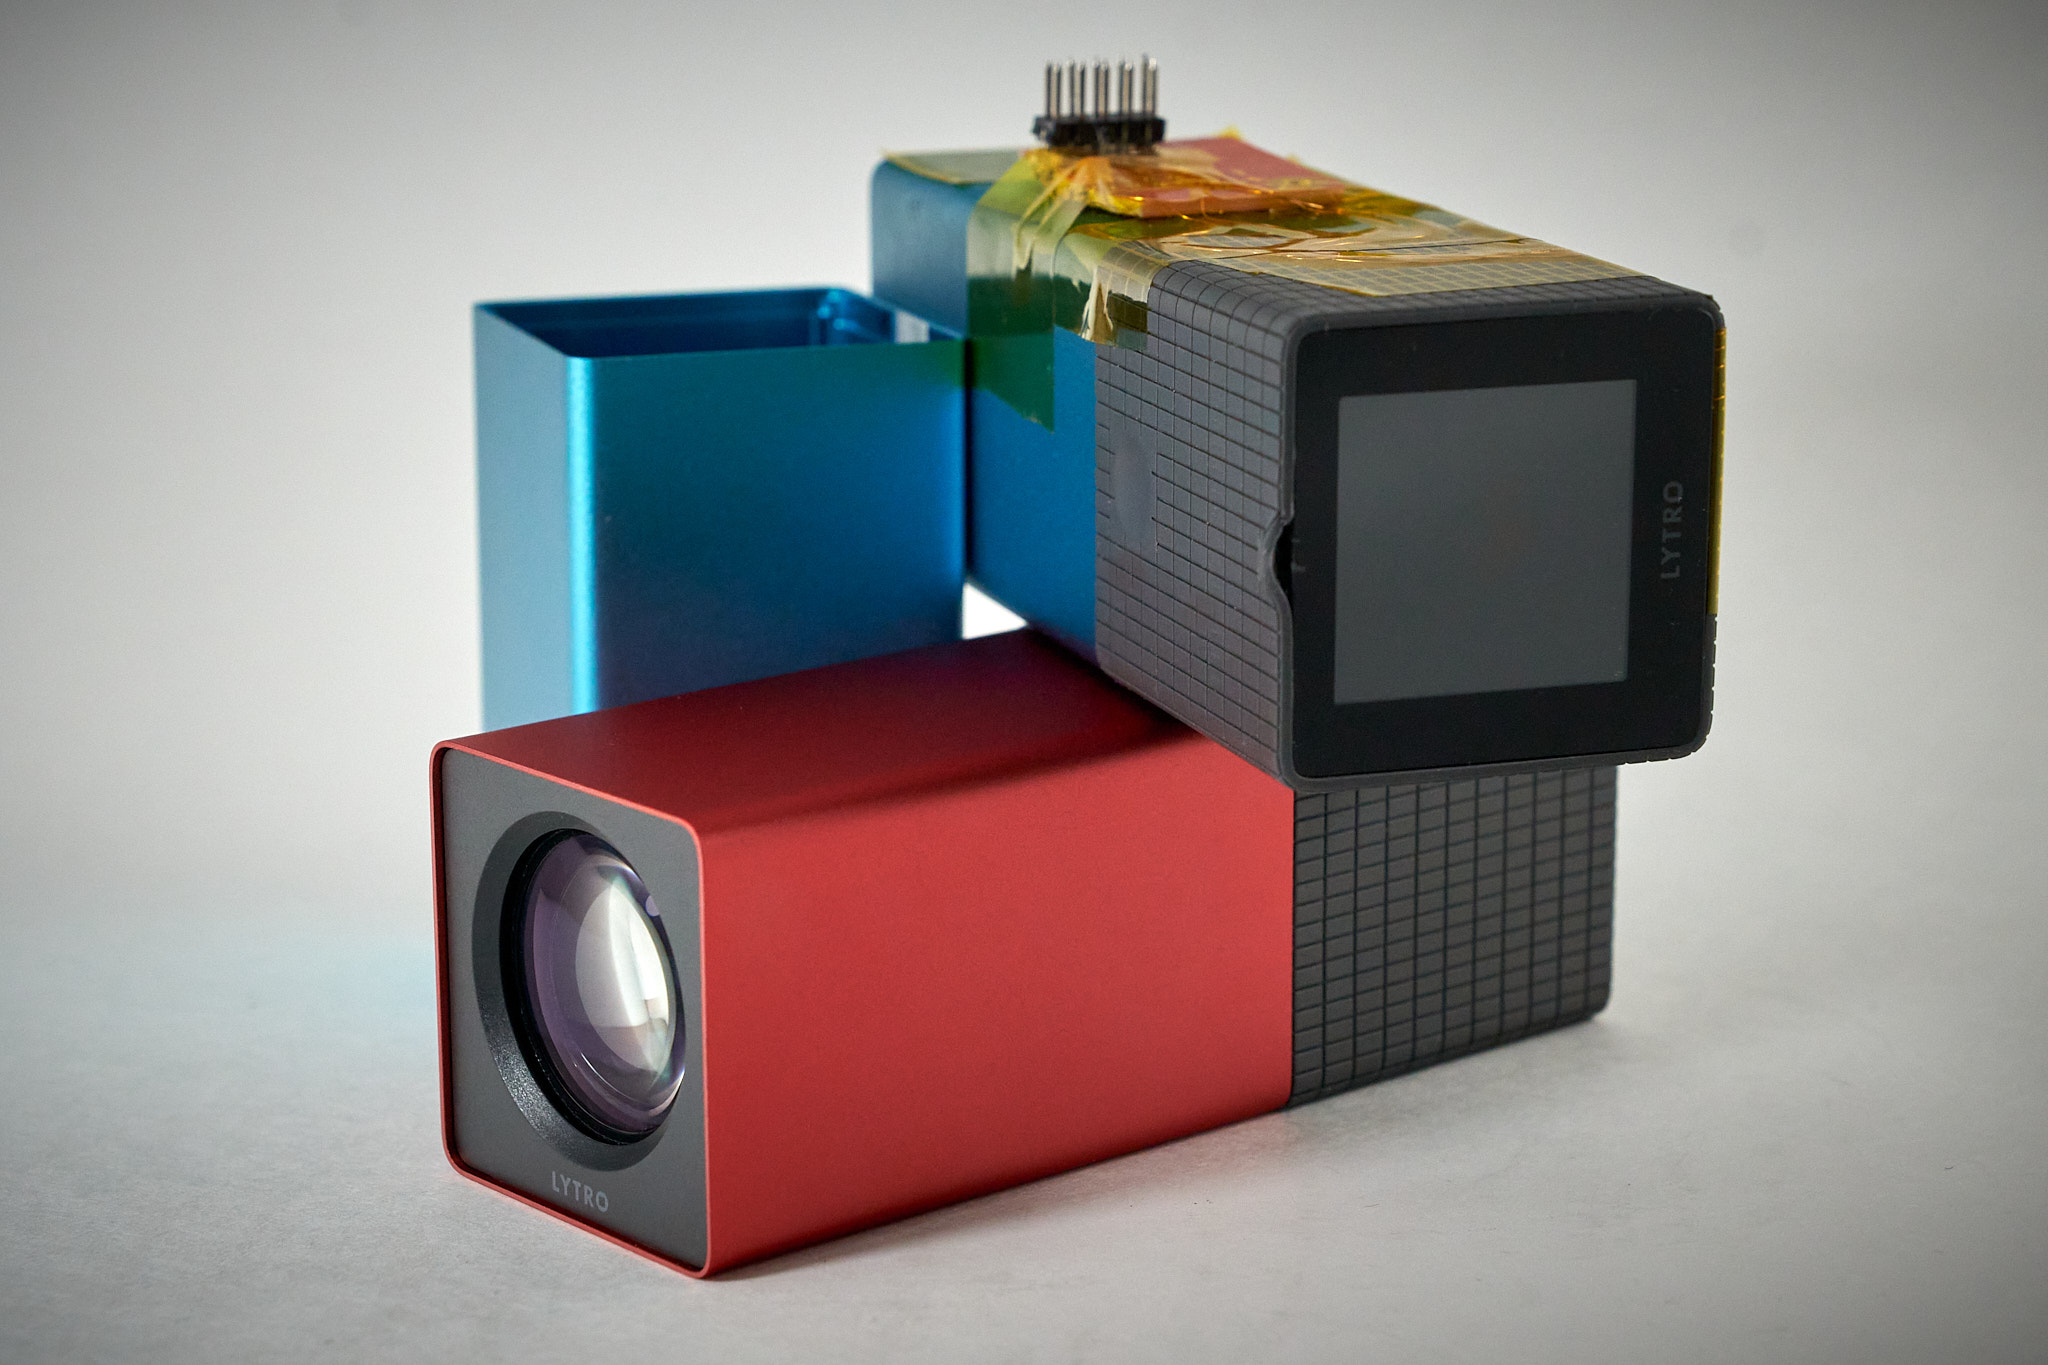 Back in 2012, technology websites were abuzz with news of the Lytro: a camera that was going to revolutionize photography thanks to its innovative lig